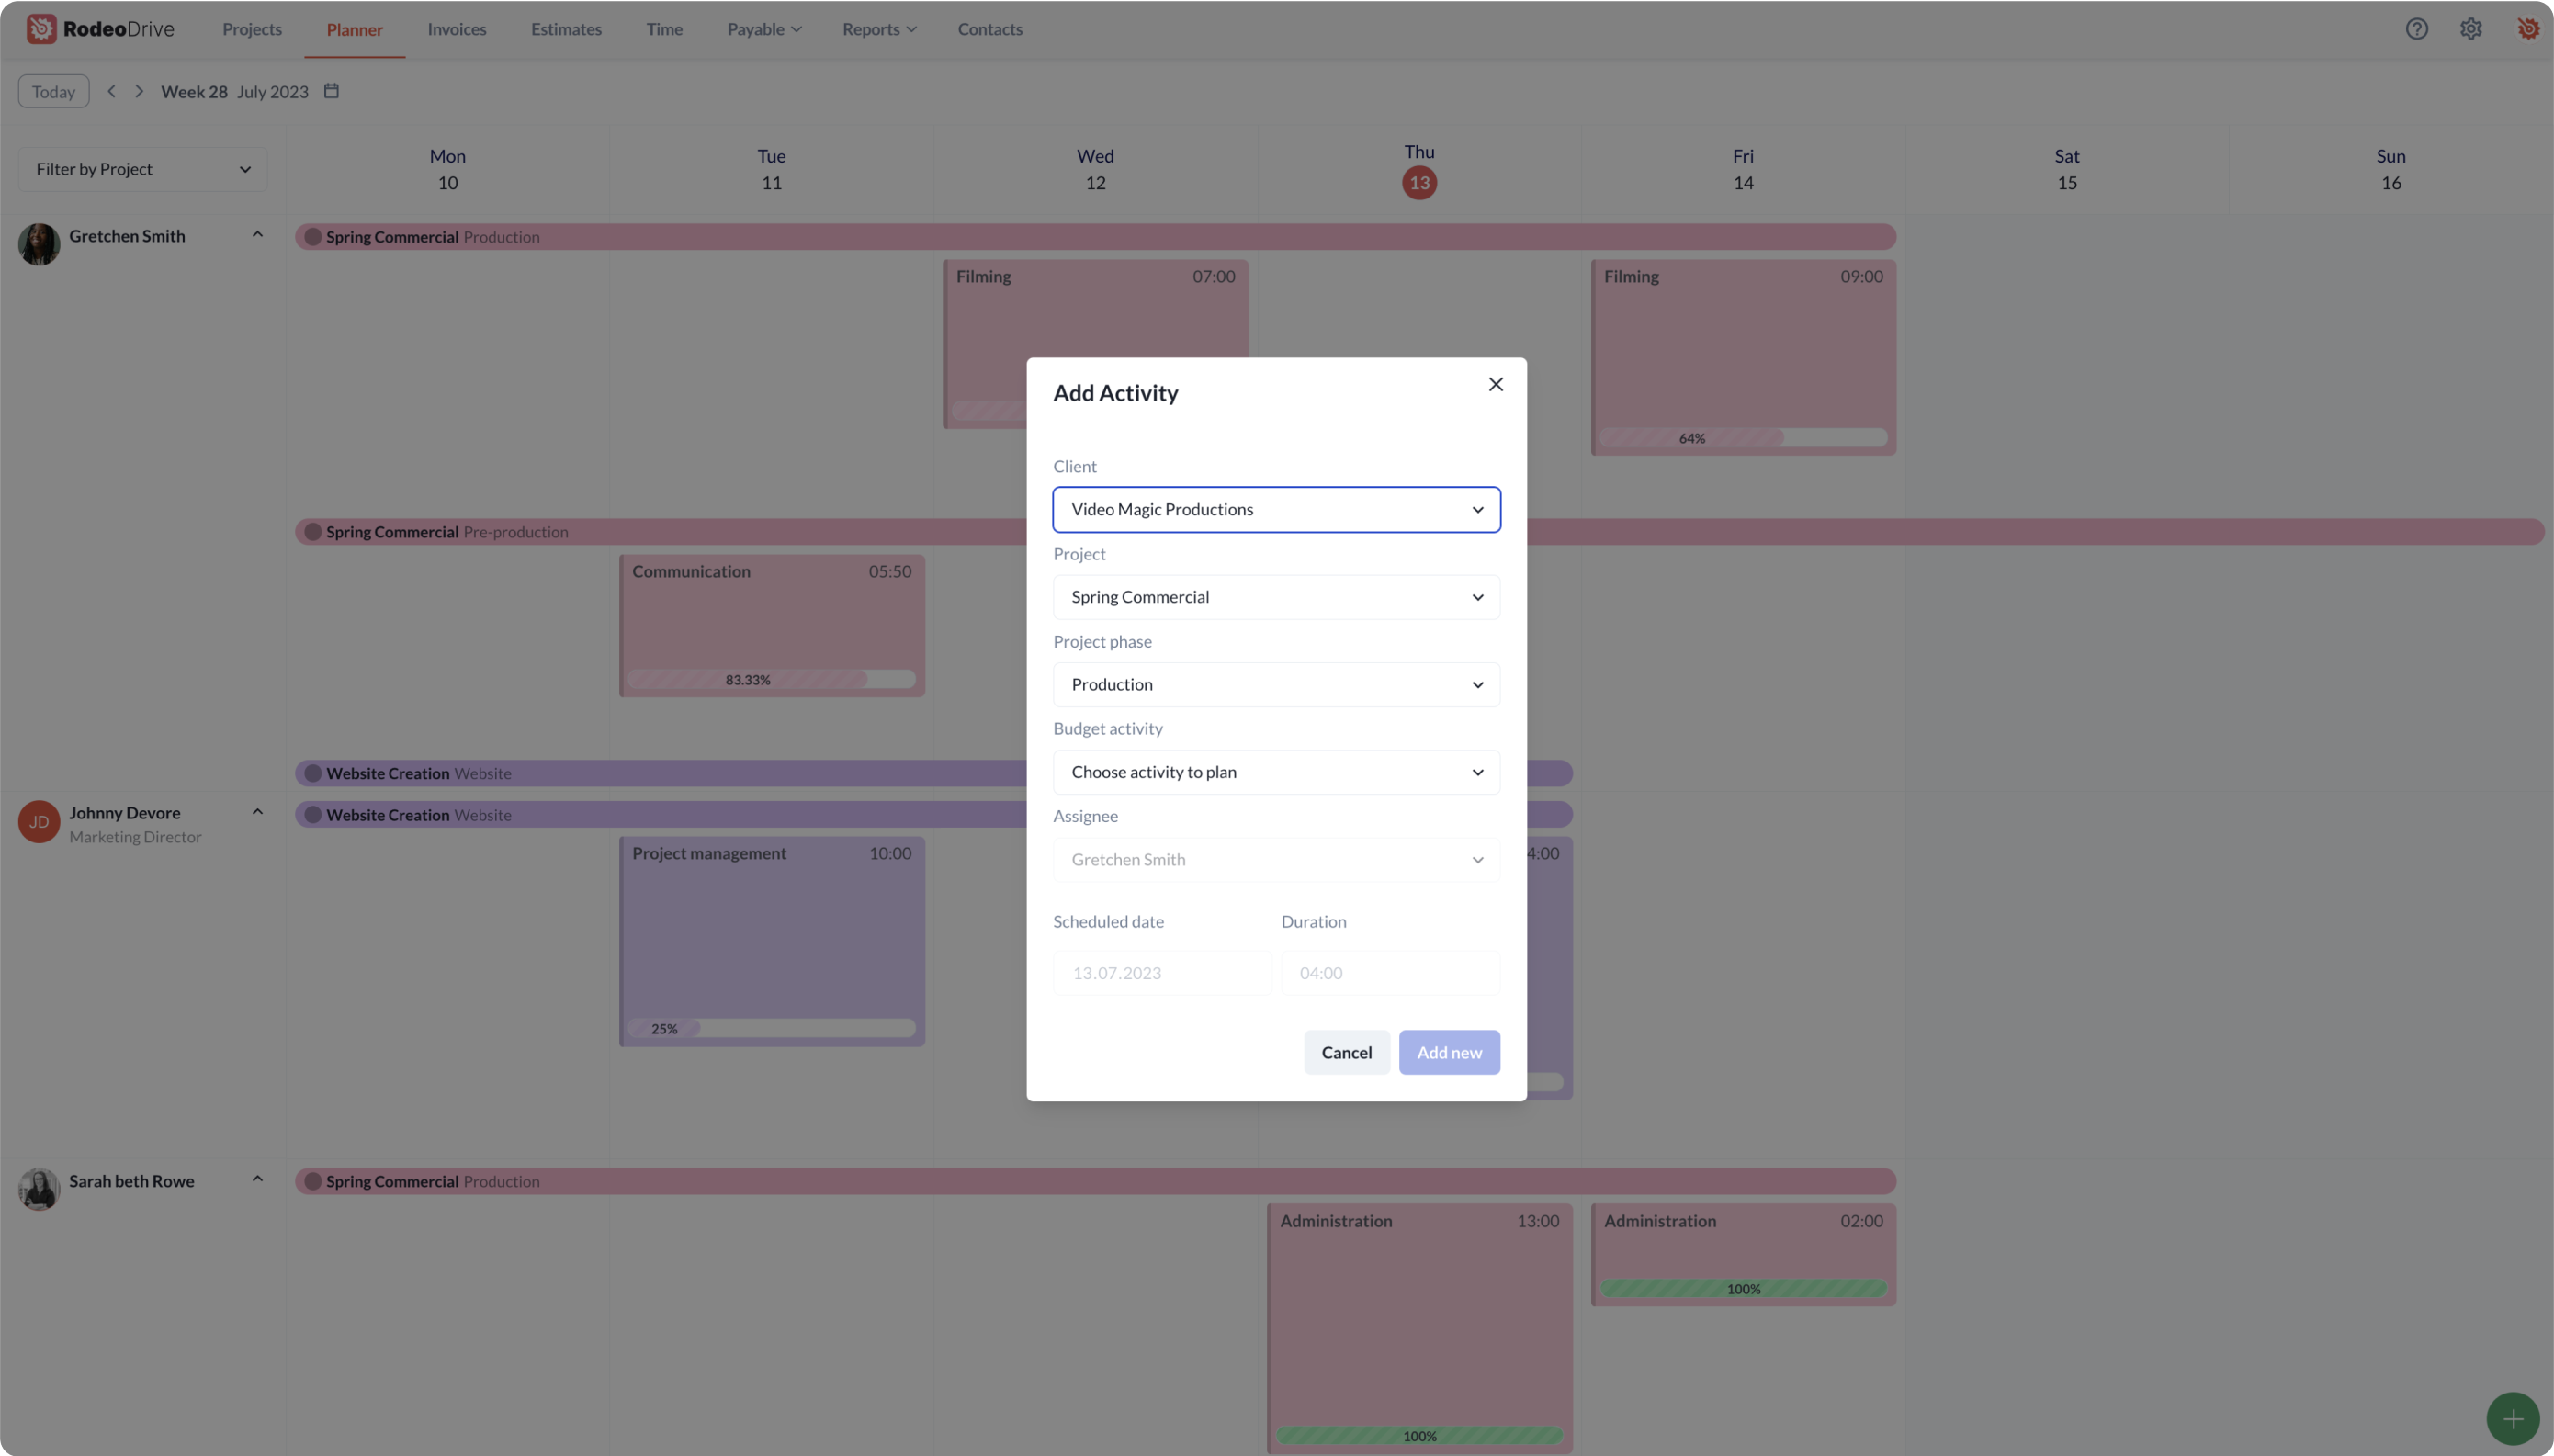 Rodeo Drive's planner feature helps you quickly allocate tasks and plan your project's schedule based on budgeted activities.